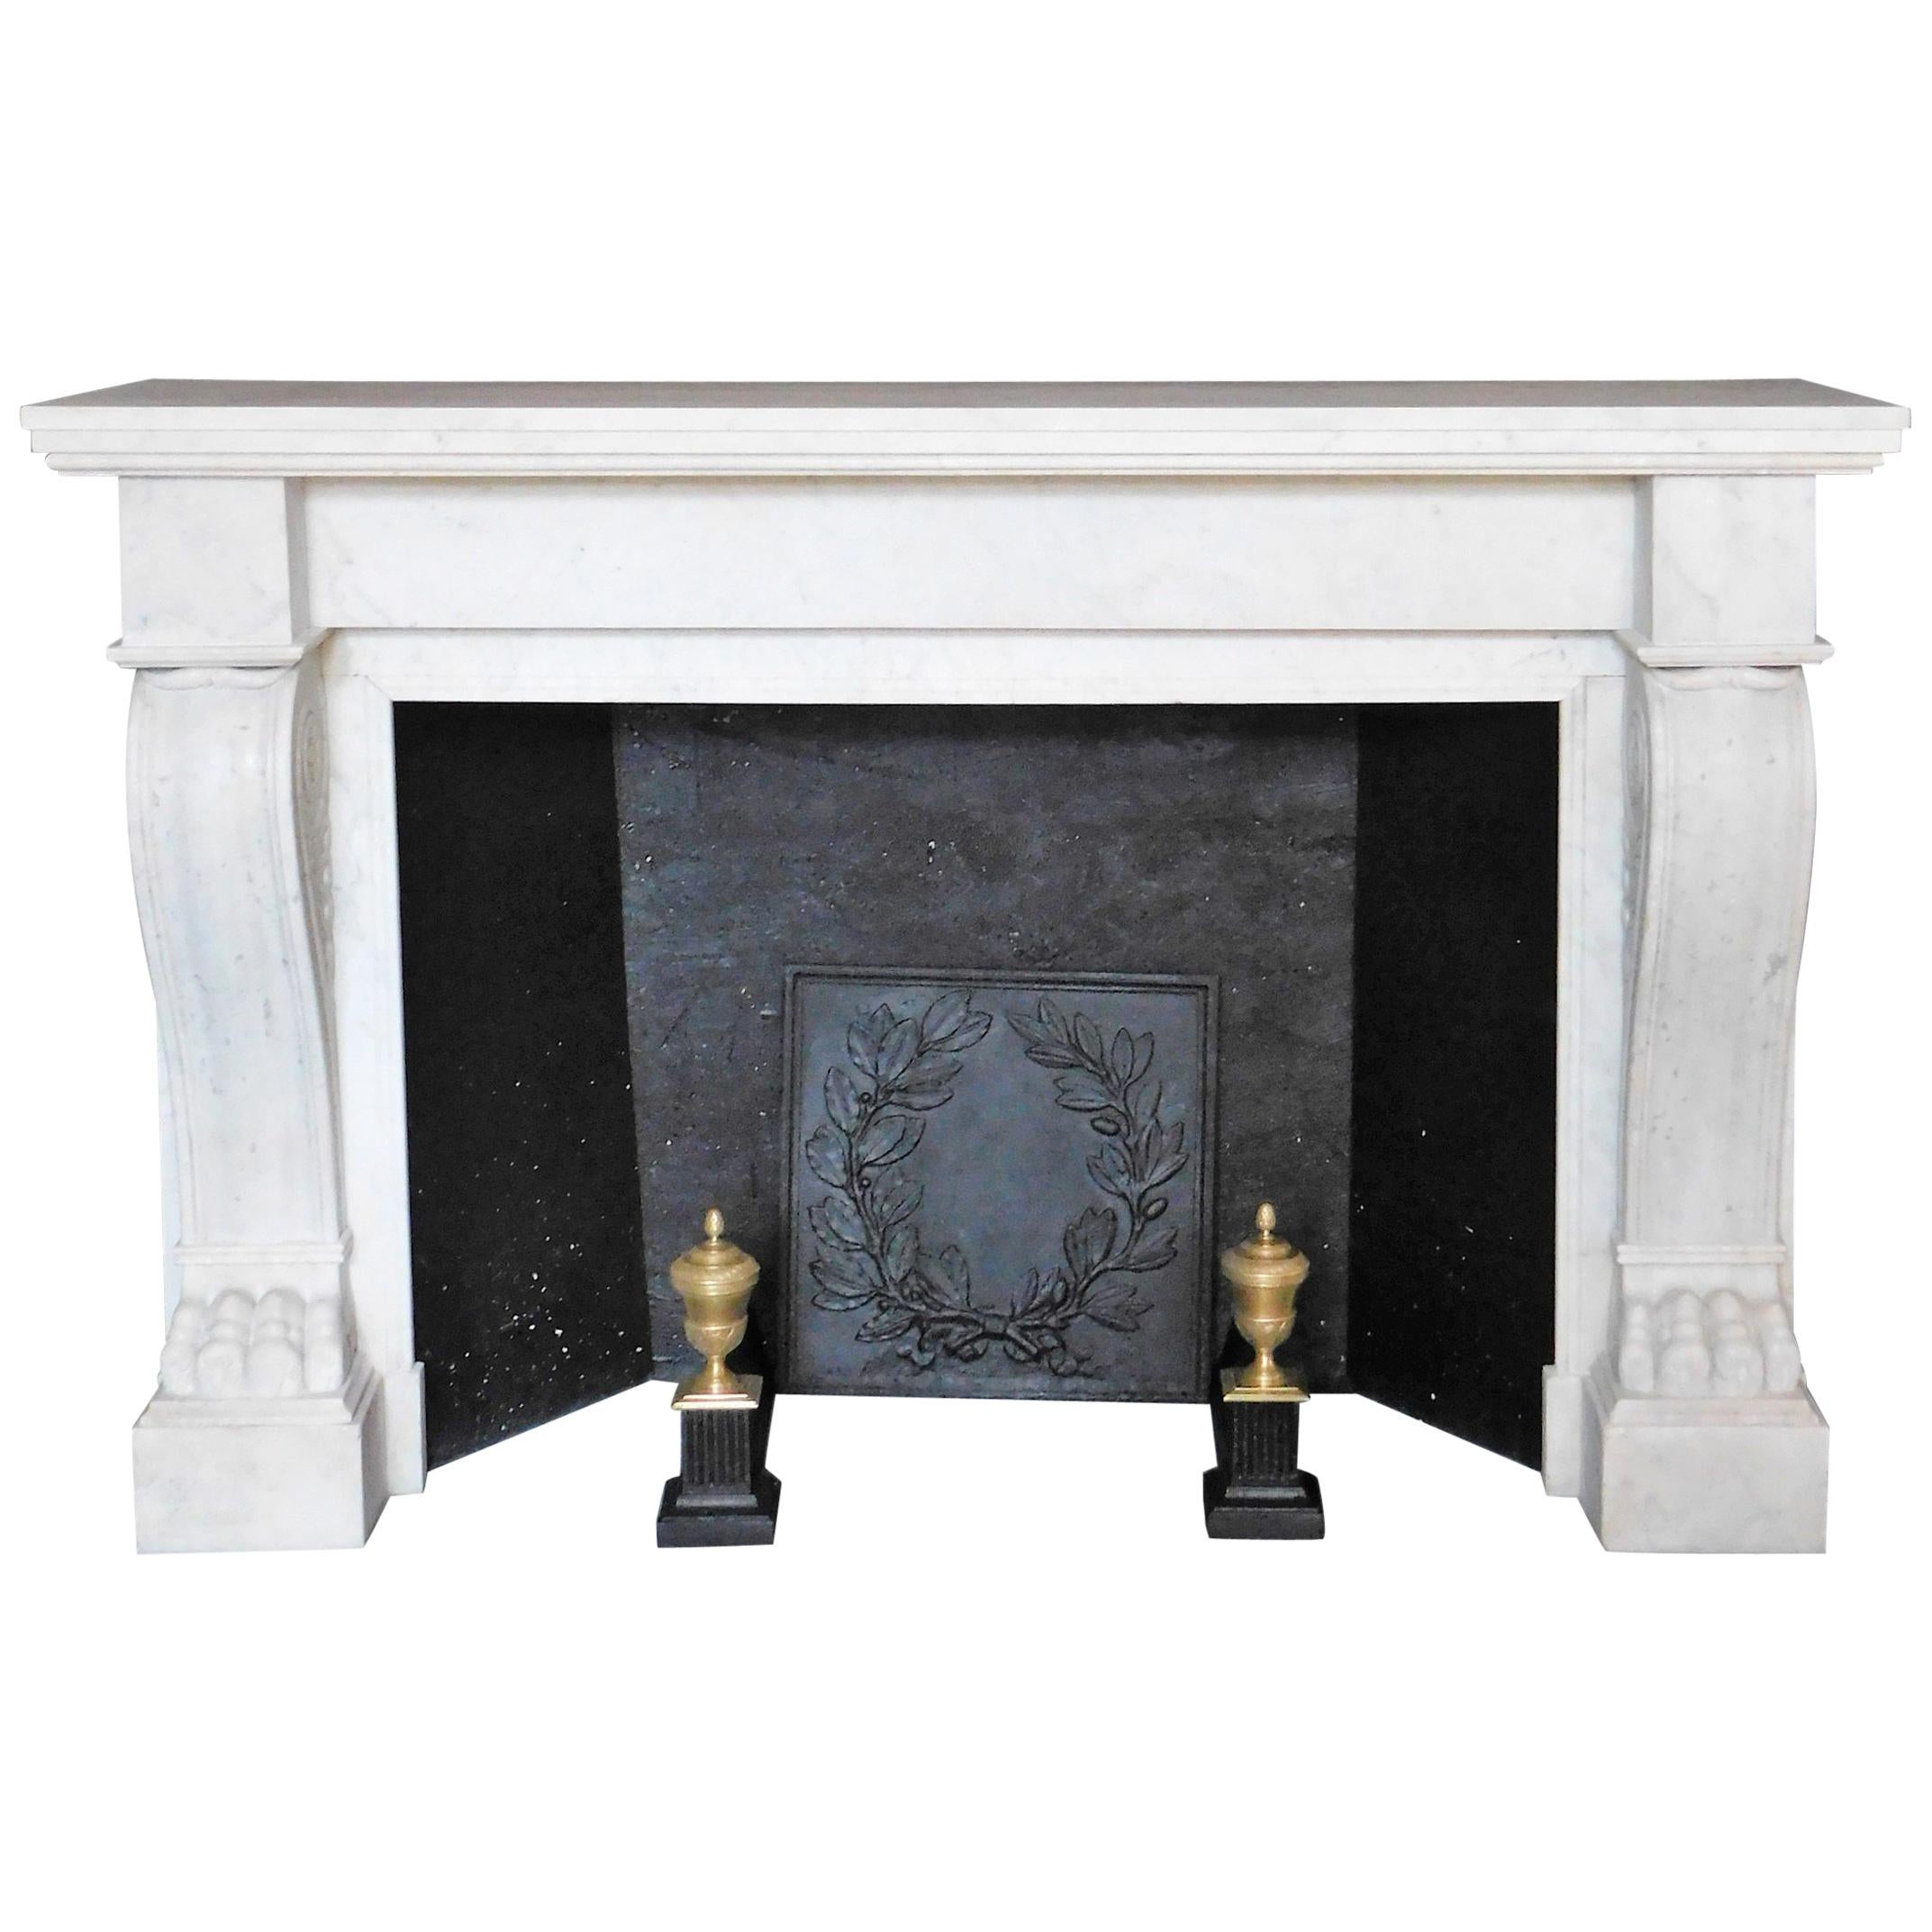 EMPIRE Fireplace Lion's Paws in Carrara Marble For Sale